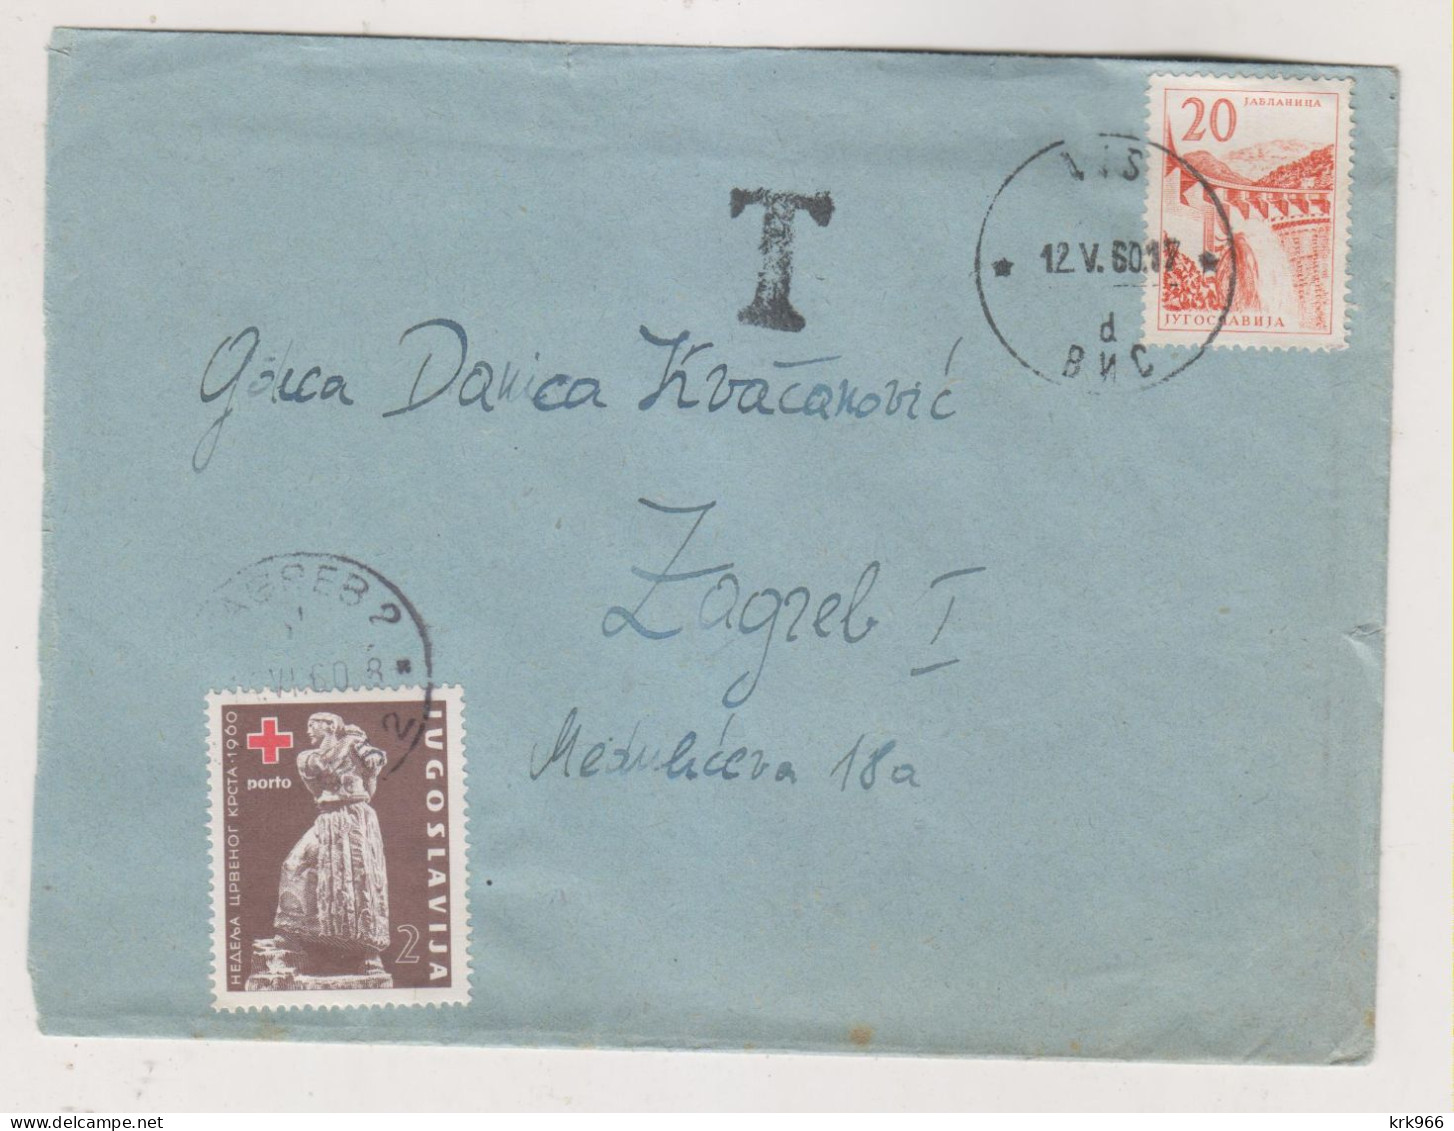 YUGOSLAVIA 1960 VIS    Nice  Cover To ZAGREB , Postage Due Charity Stamp - Covers & Documents